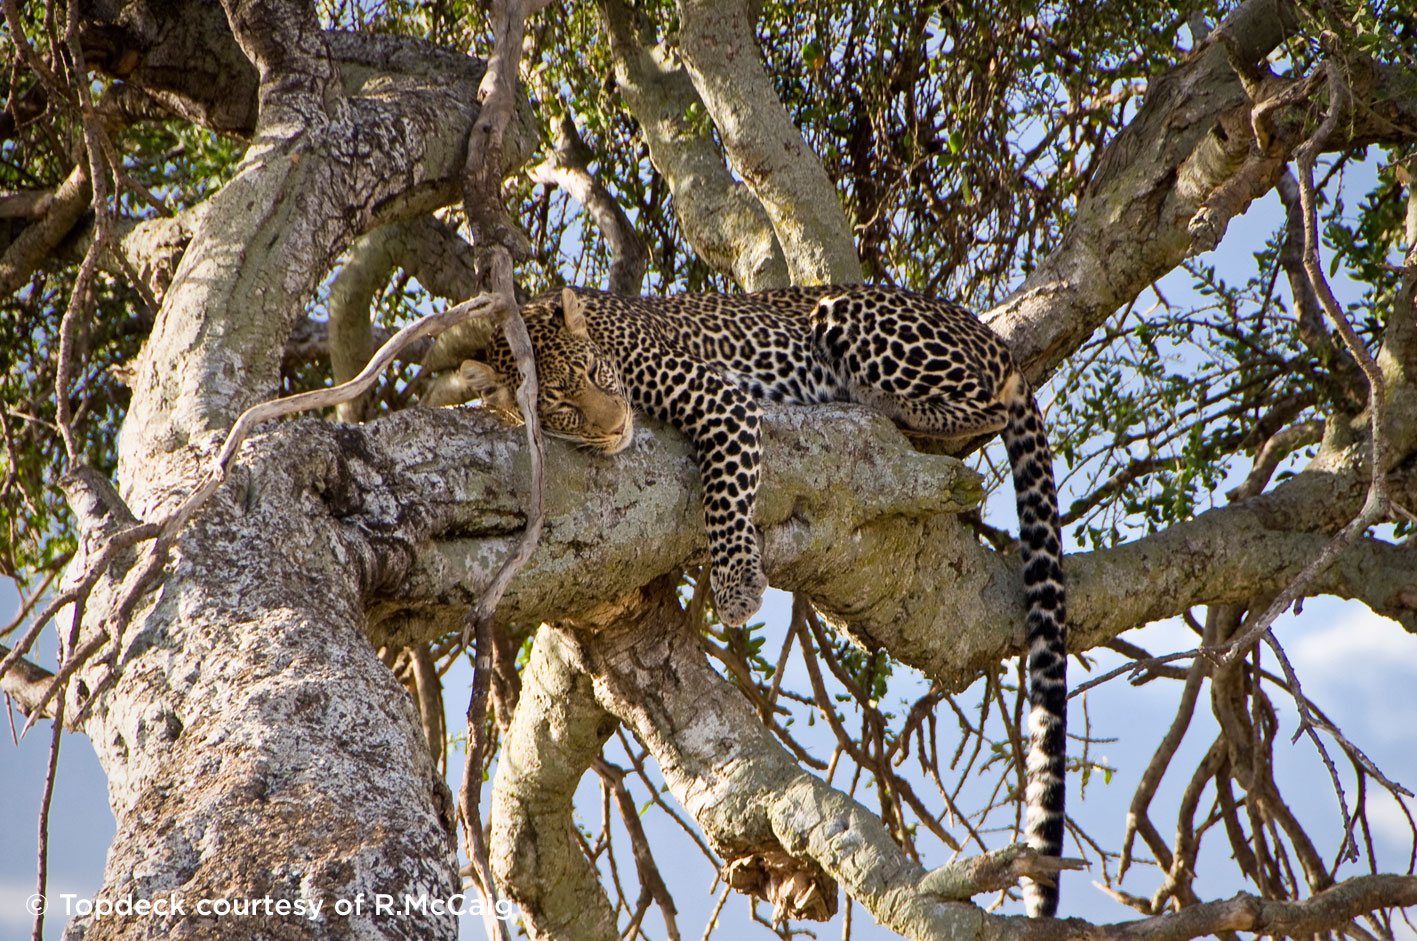 Image 1.	Our first afternoon in Maasai Mara National Reserve, and we spot a sleeping Leopard in a tree right beside the track. It was a good find because they say Leopards are often the hardest animal to spot out of those in the Big Five.